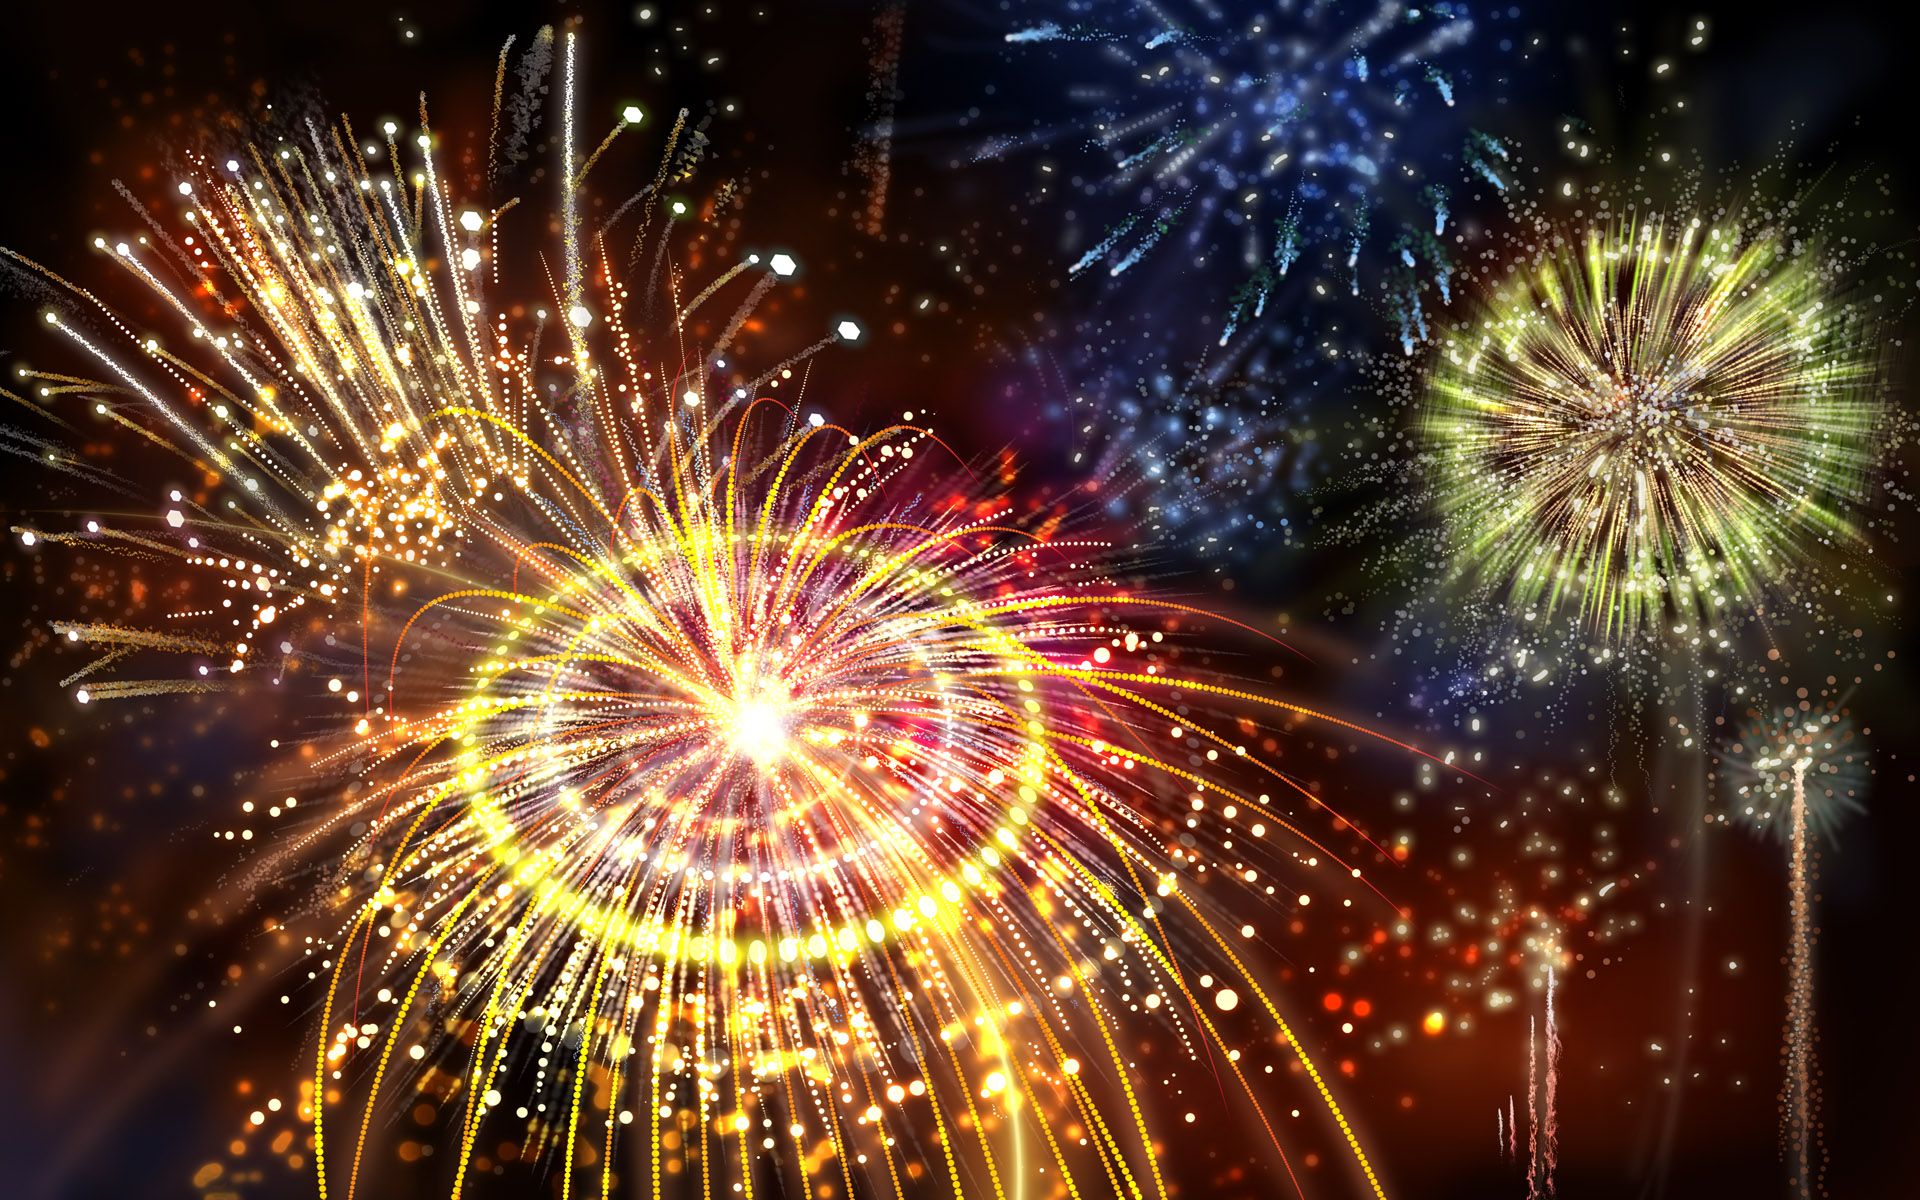 HD wallpaper, Fireworks, Pictures, Beautiful